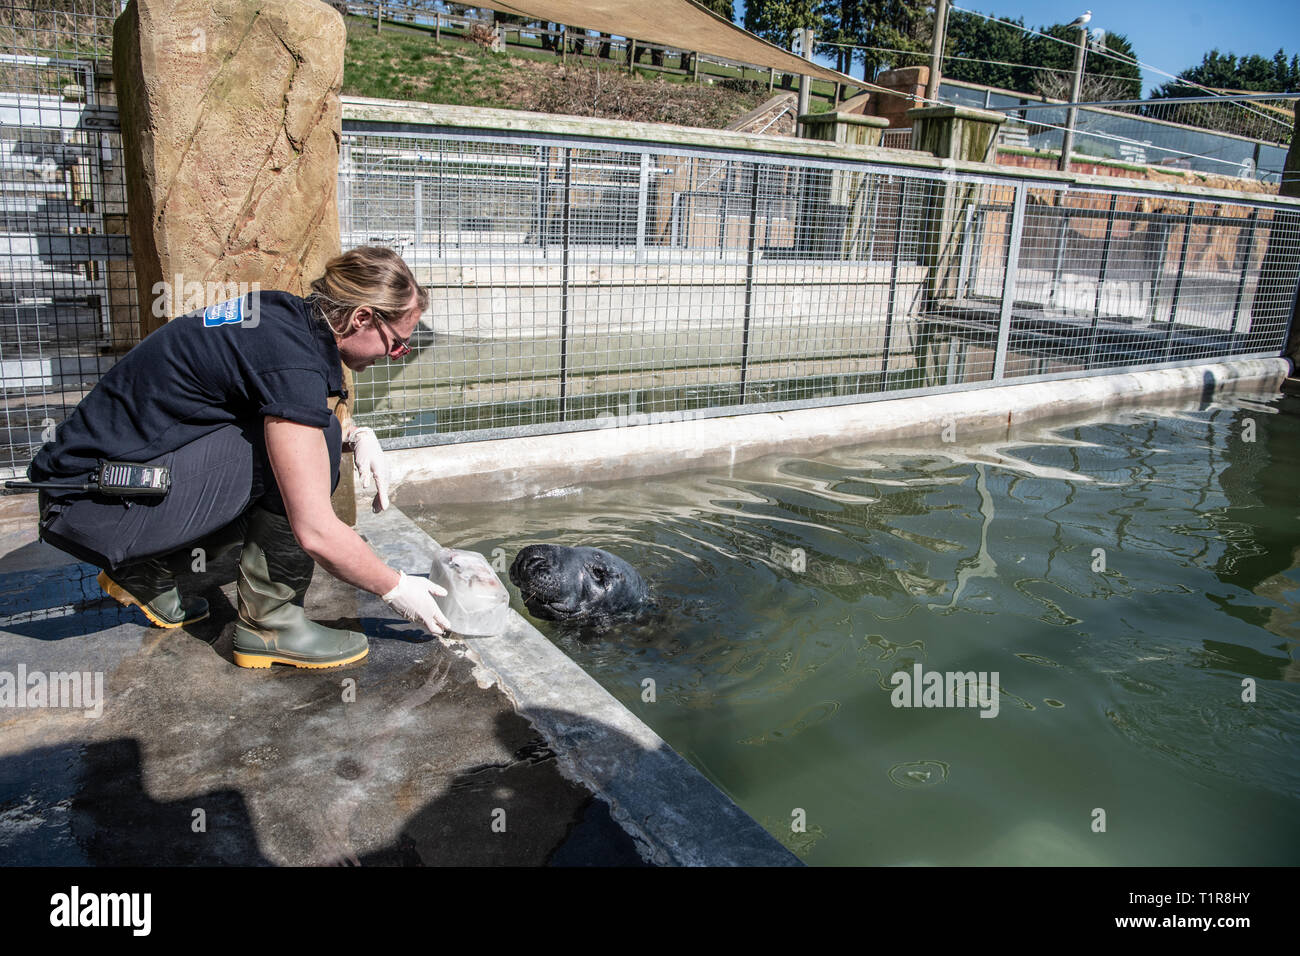 Cornish Seal Sanctuary, Gweek, Cornwall, UK. 28th Mar, 2019. Rescued grey seal Stevie affected by the uncertainty around Brexit. Grace Jones feeds Frozen fish to Steve as a treat Stevie’s pool refurbishment was going to take around 6 weeks to complete and is due to be ready on the 28th March as no one was prepared to take any chances to move Stevie any later than the planned Brexit ruling date! If the Pool is not ready before the Brexit date, there are many issues that would mean Stevie would not be able to return back to his home in Belgium. Credit: kathleen white/Alamy Live News Stock Photo